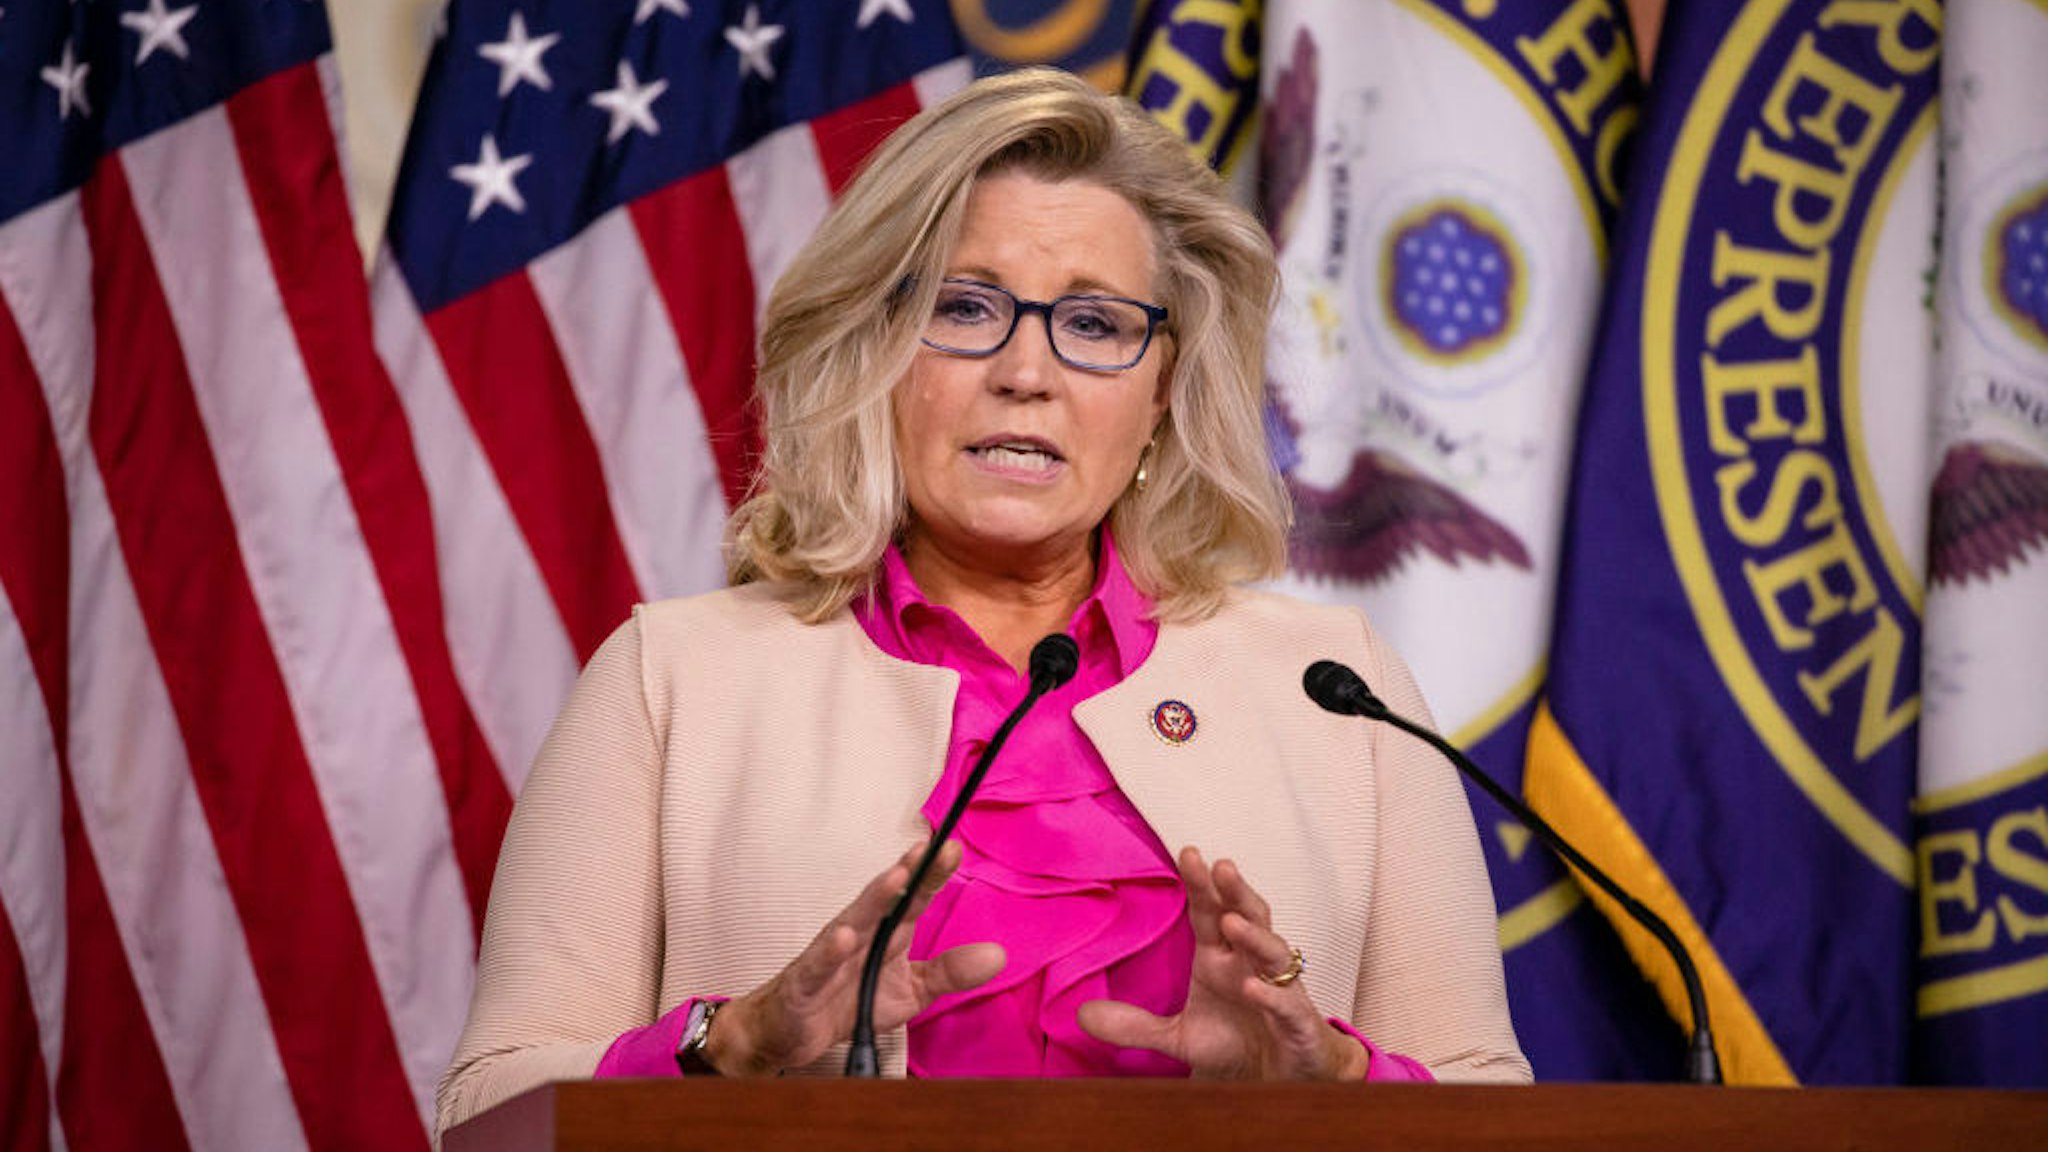 WASHINGTON, DC - JULY 21: Rep. Liz Cheney (R-WY) speaks during a news with other Republican members of the House of Representatives at the US Capitol on July 21, 2020 in Washington, DC. (Photo by Samuel Corum/Getty Images) *** Local Caption *** Liz Cheney